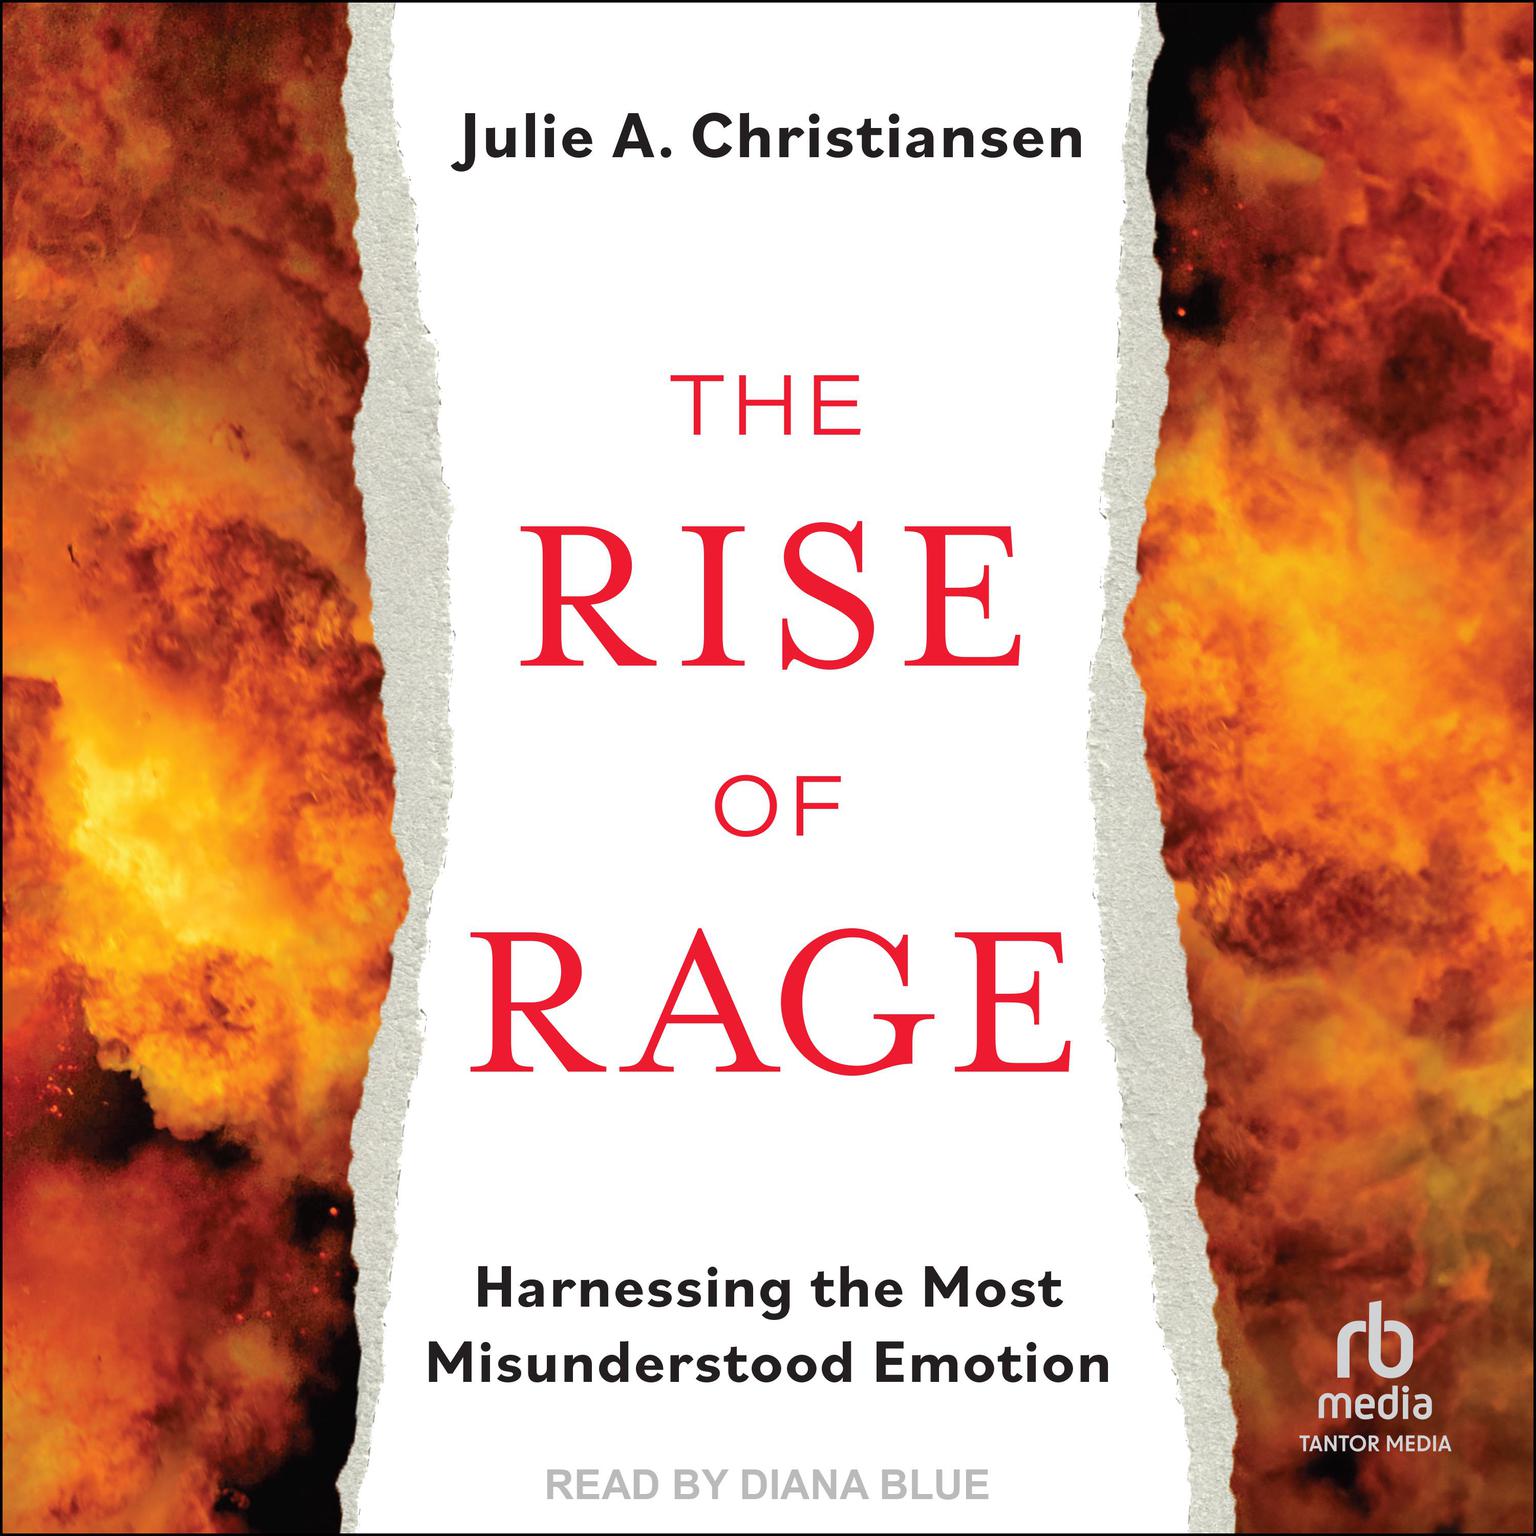 The Rise of Rage: Harnessing the Most Misunderstood Emotion Audiobook, by Julie A. Christiansen